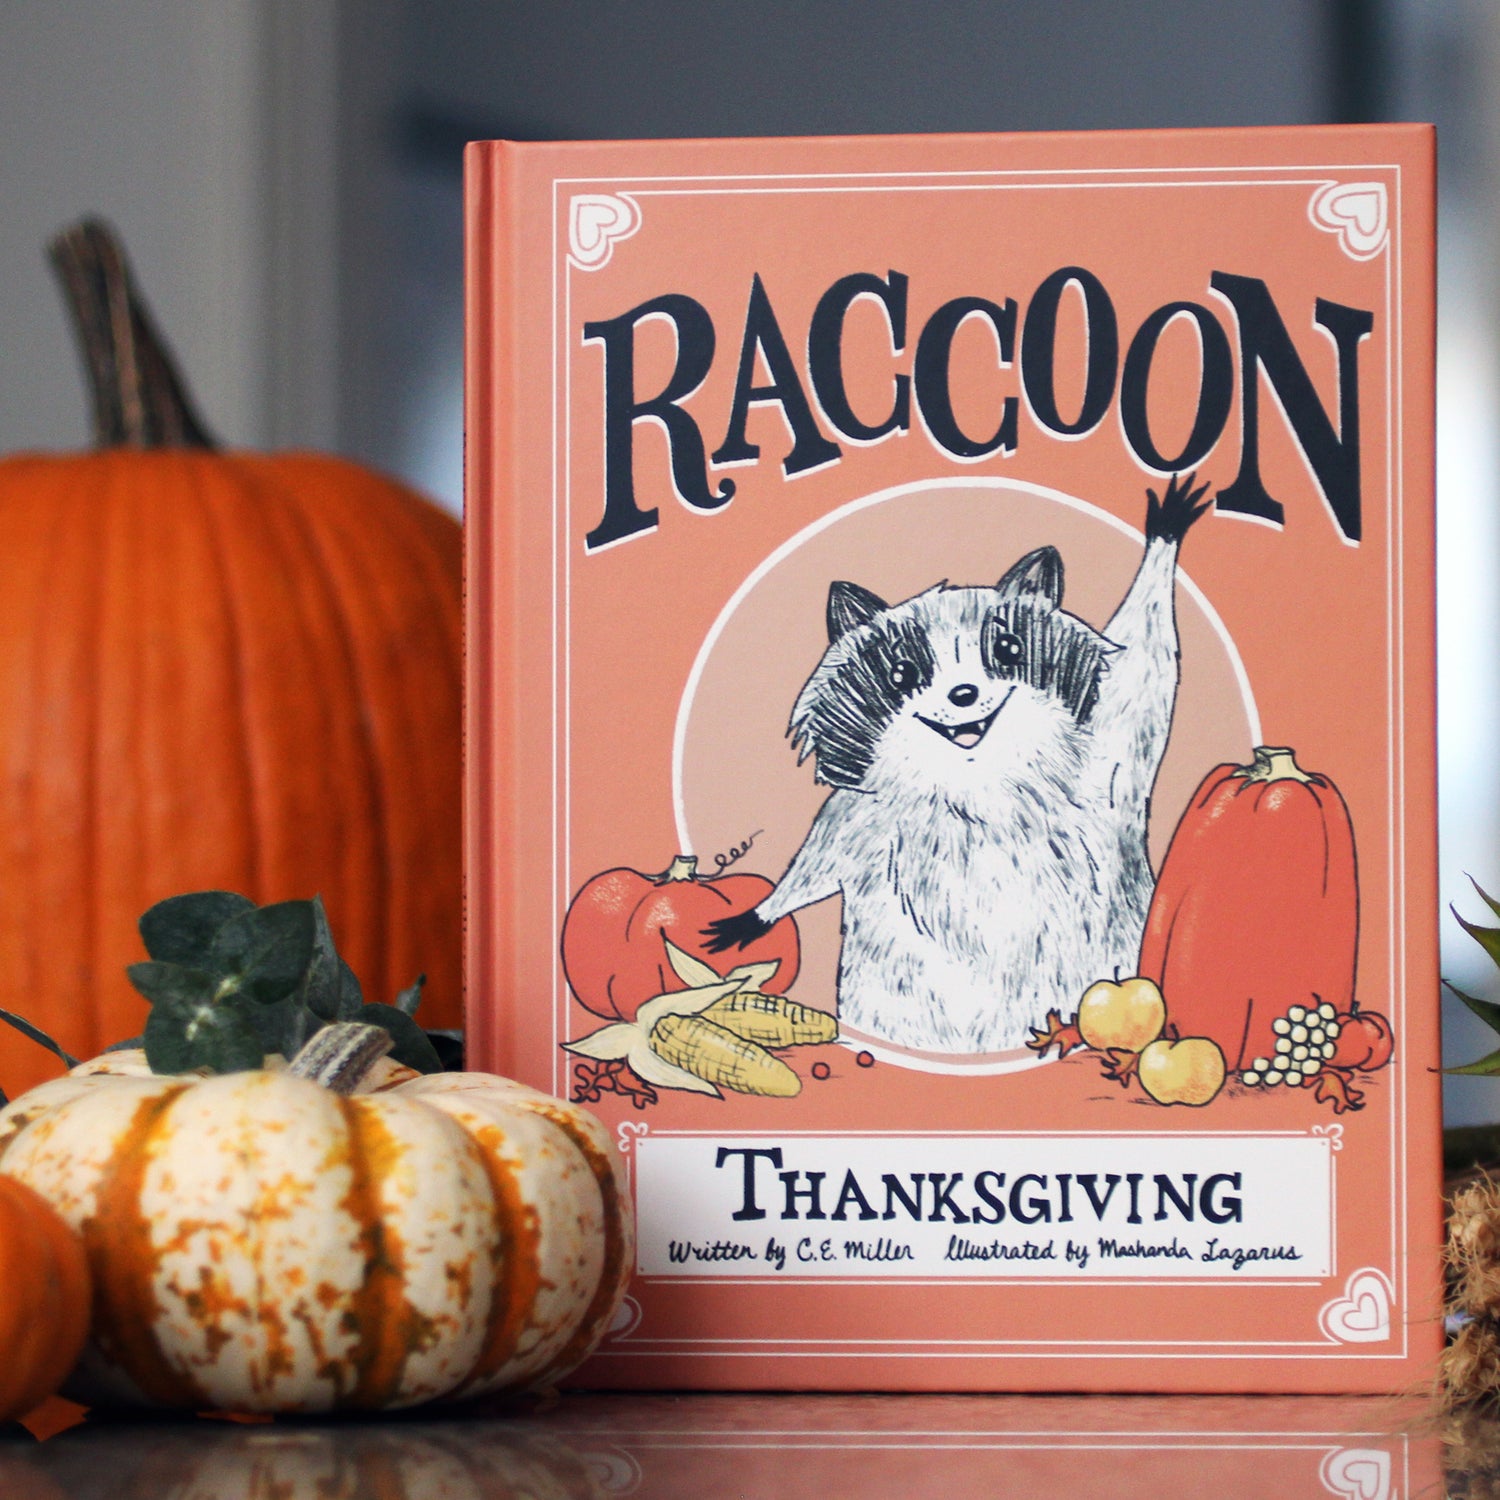 Children's picture book with raccoon on the cover